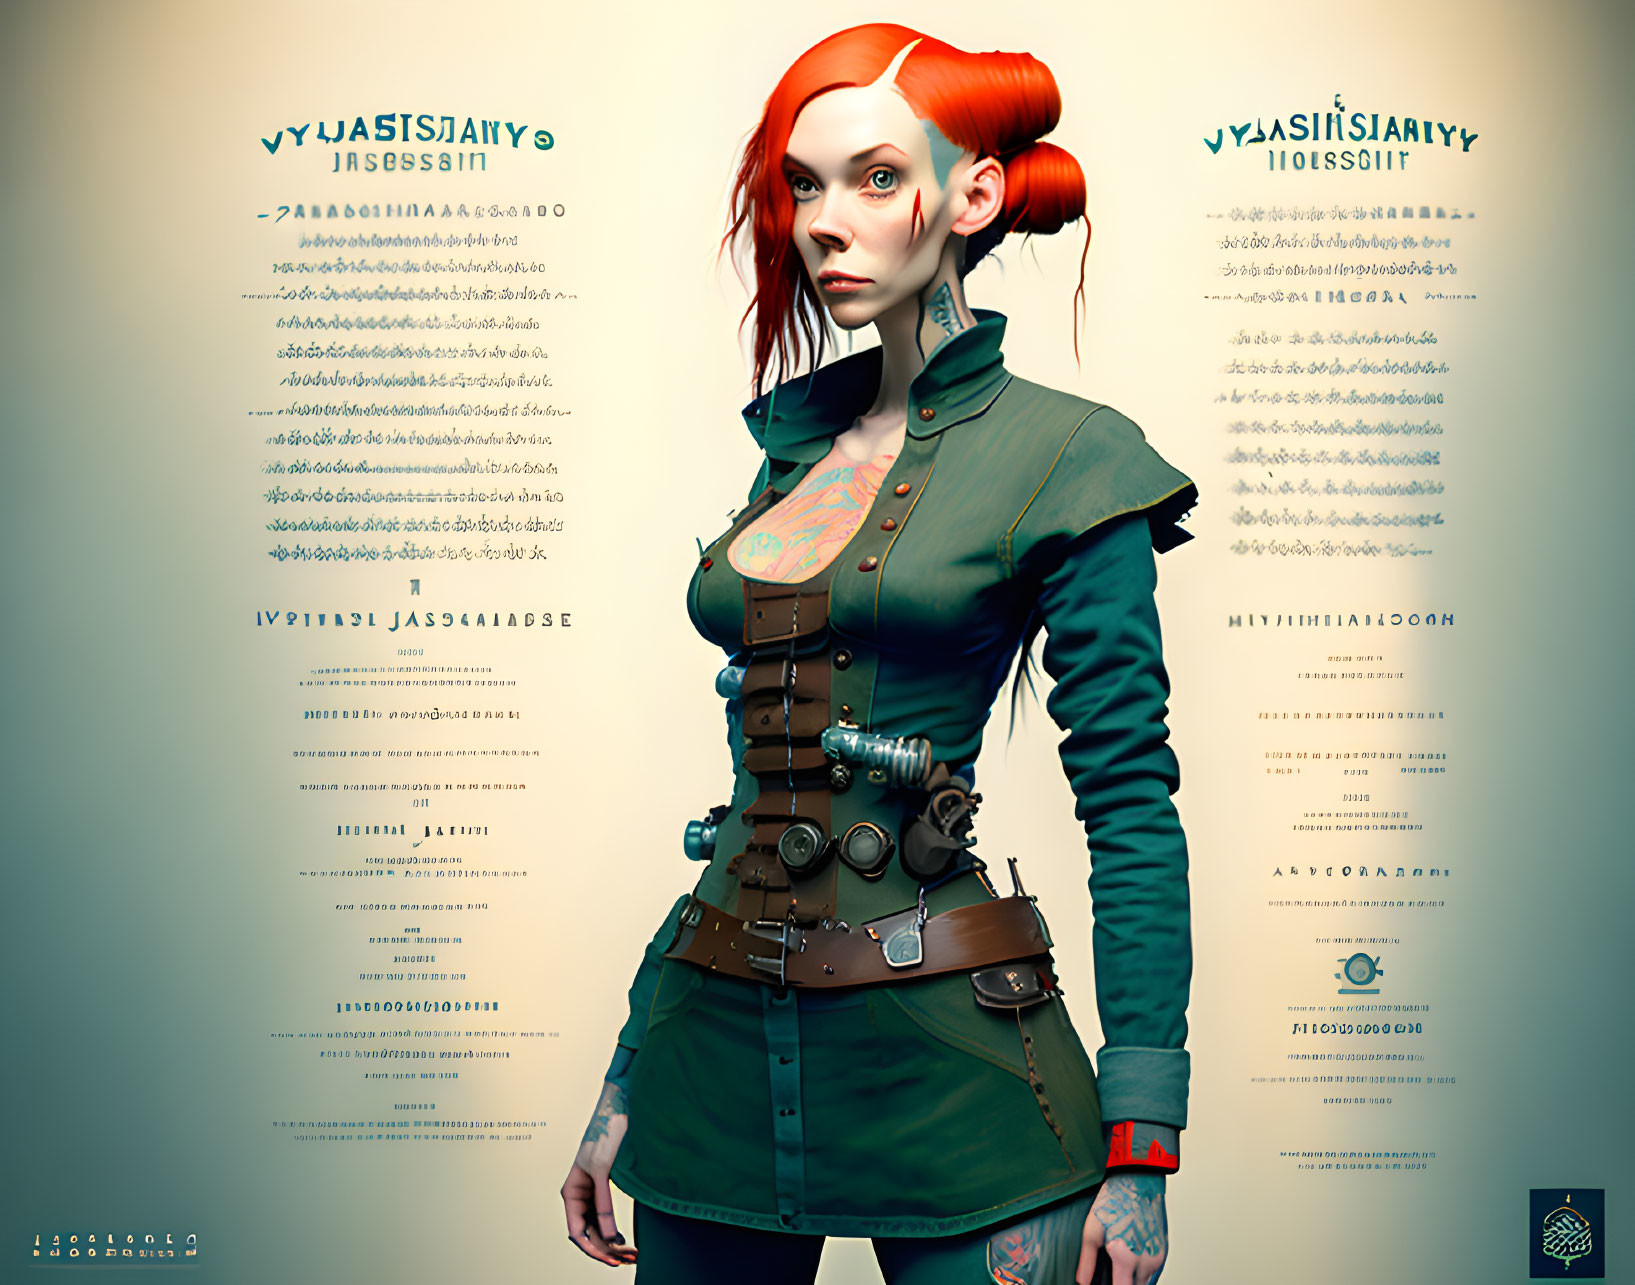 Digital Stylized Image: Woman with Red Hair in Steampunk Outfit